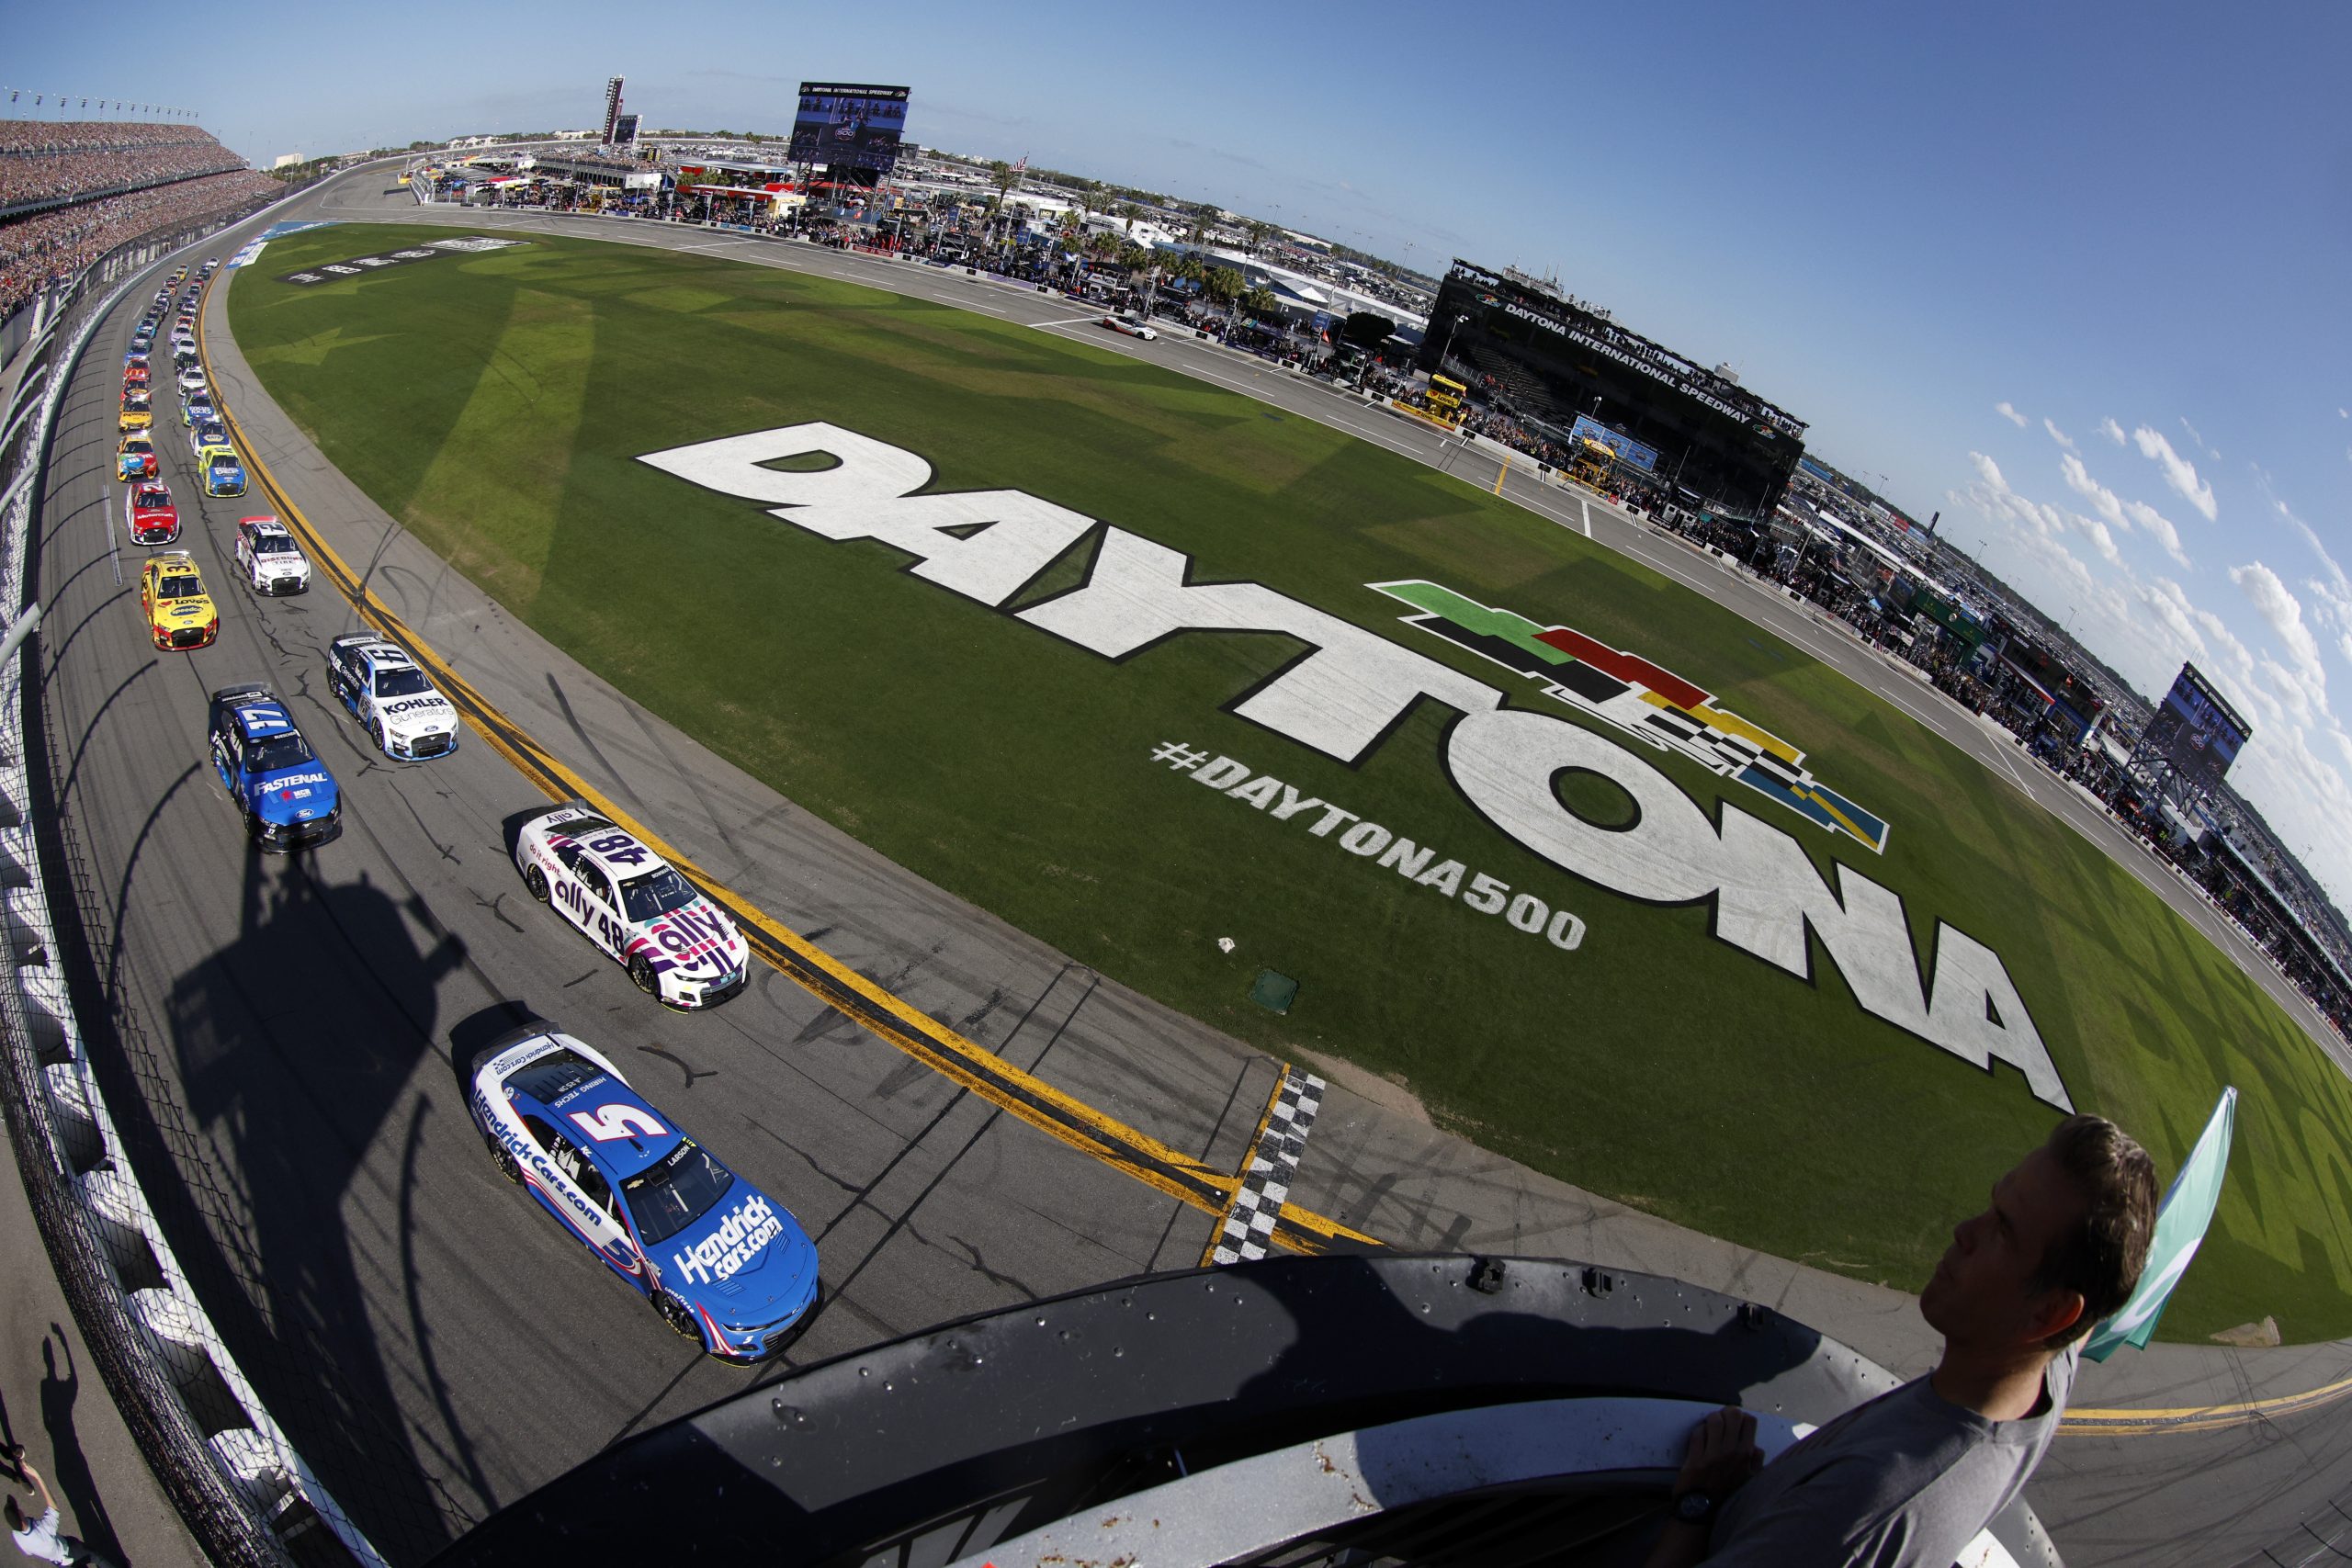 DAYTONA BEACH, FLORIDA - FEBRUARY 20: Kyle Larson, driver of the #5 HendrickCars.com Chevrolet, leads the field to the green flag to start the NASCAR Cup Series 64th Annual Daytona 500 at Daytona International Speedway on February 20, 2022 in Daytona Beach, Florida. (Photo by Sean Gardner/Getty Images)